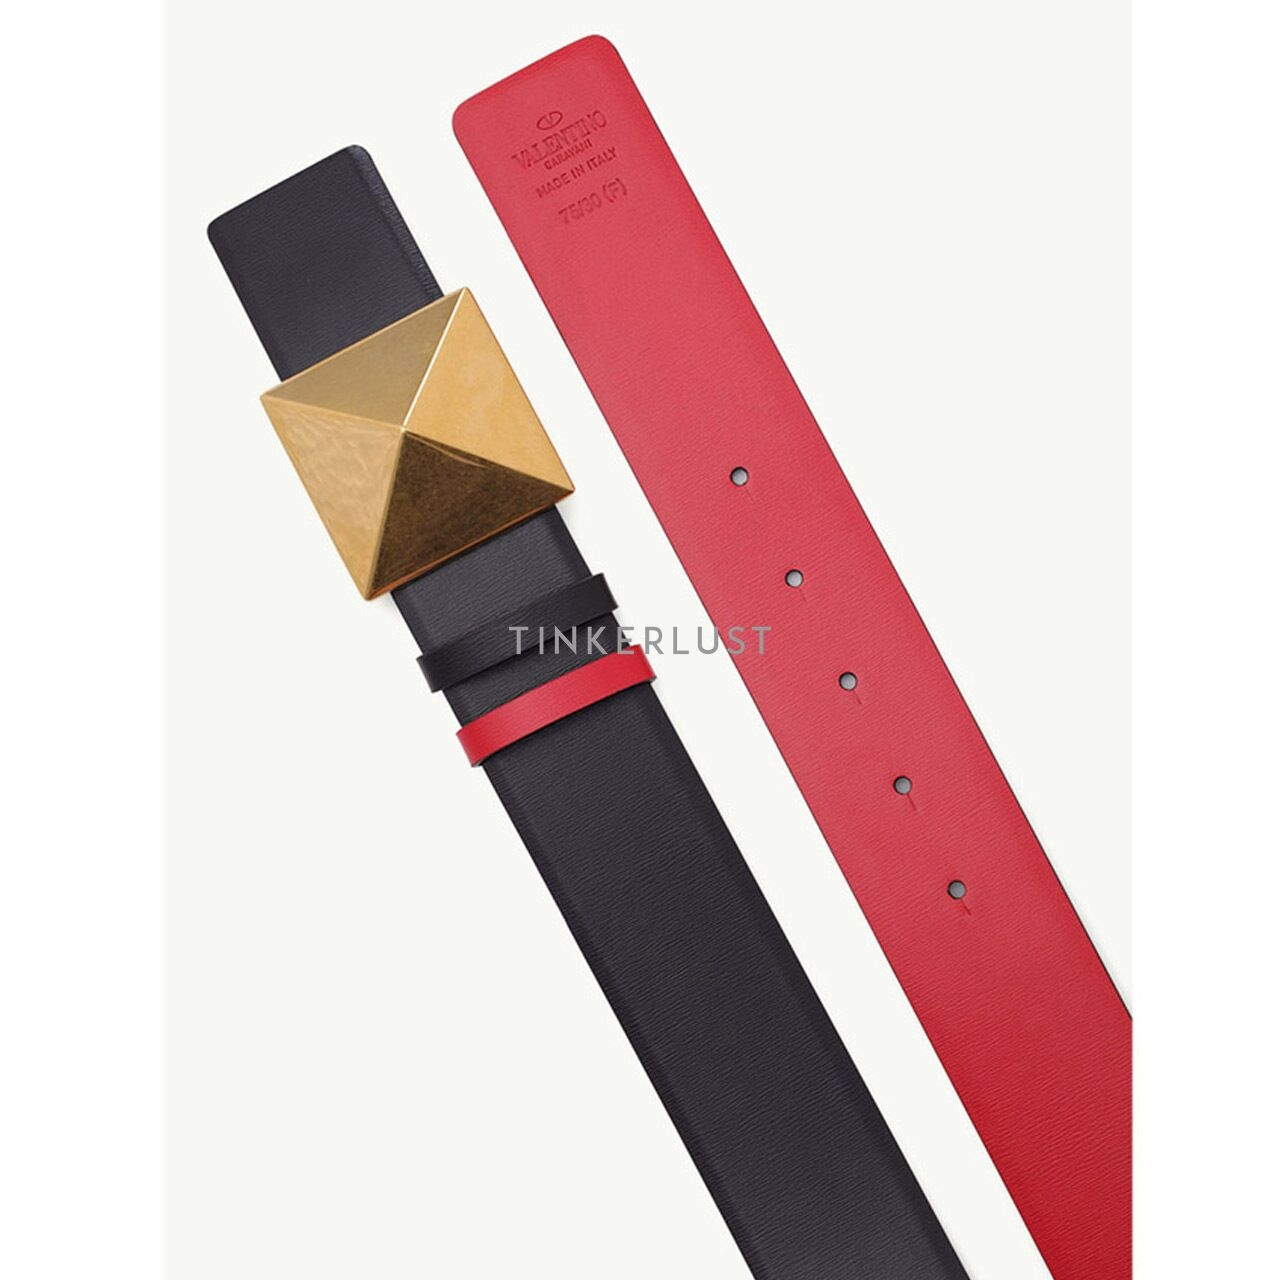 Valentino One Stud 40mm in Black/Pure Red Calfskin Reversible Belt